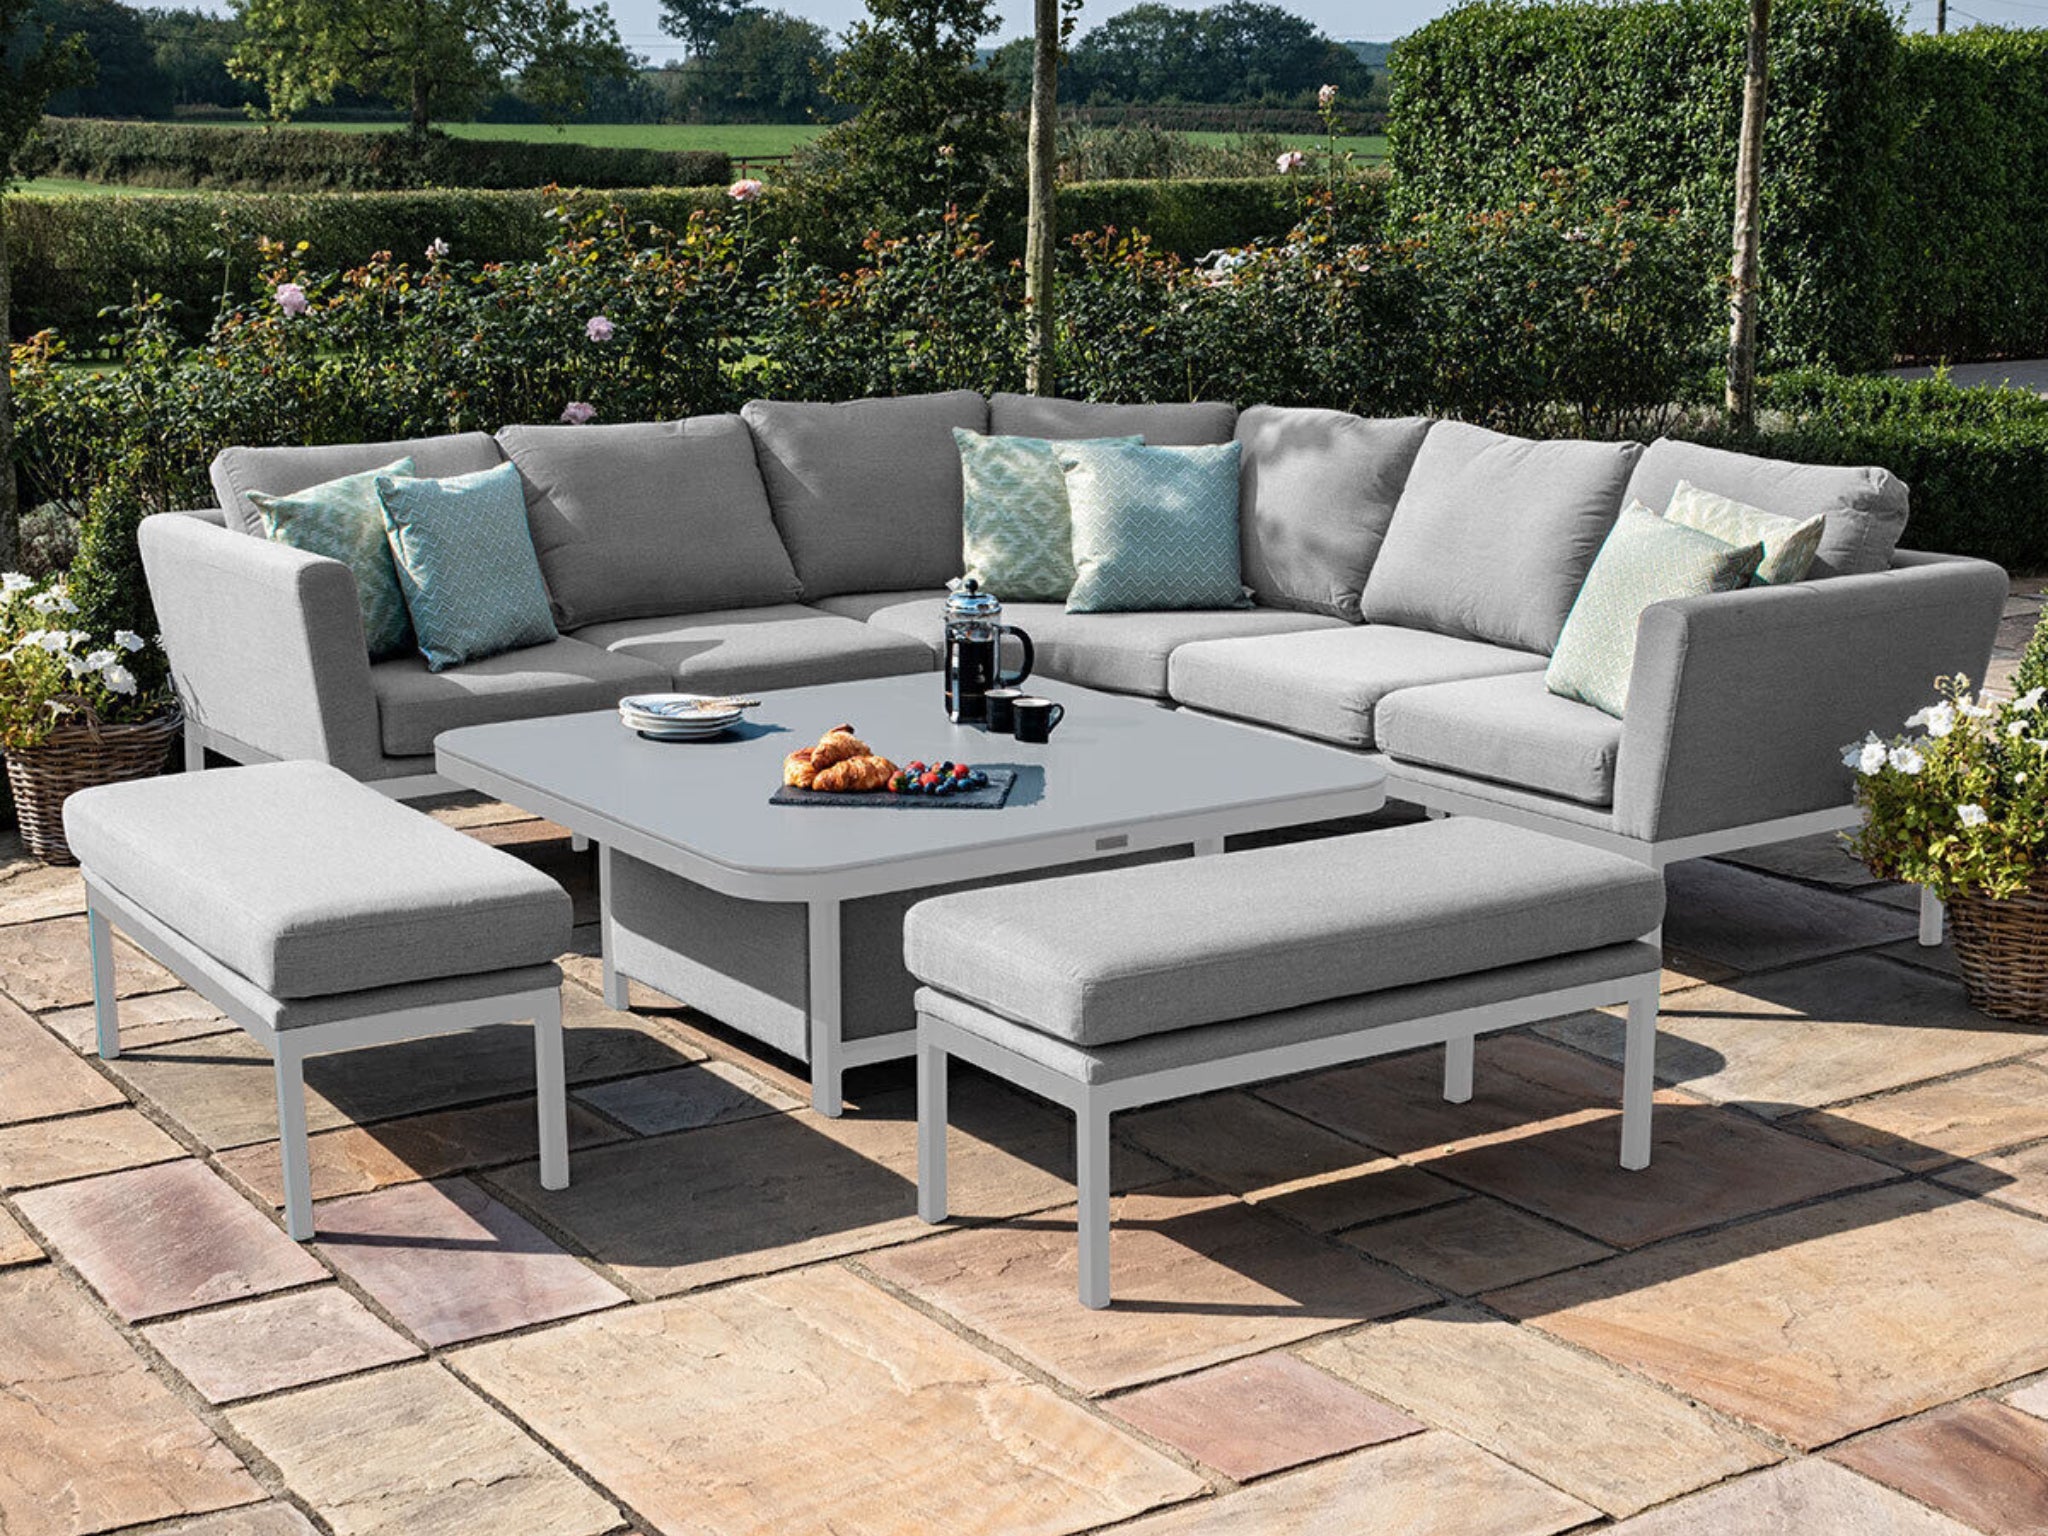 SIMPO Pulse 6-Piece Outdoor Modular Lounge Setting (Square) — Lead Chiné